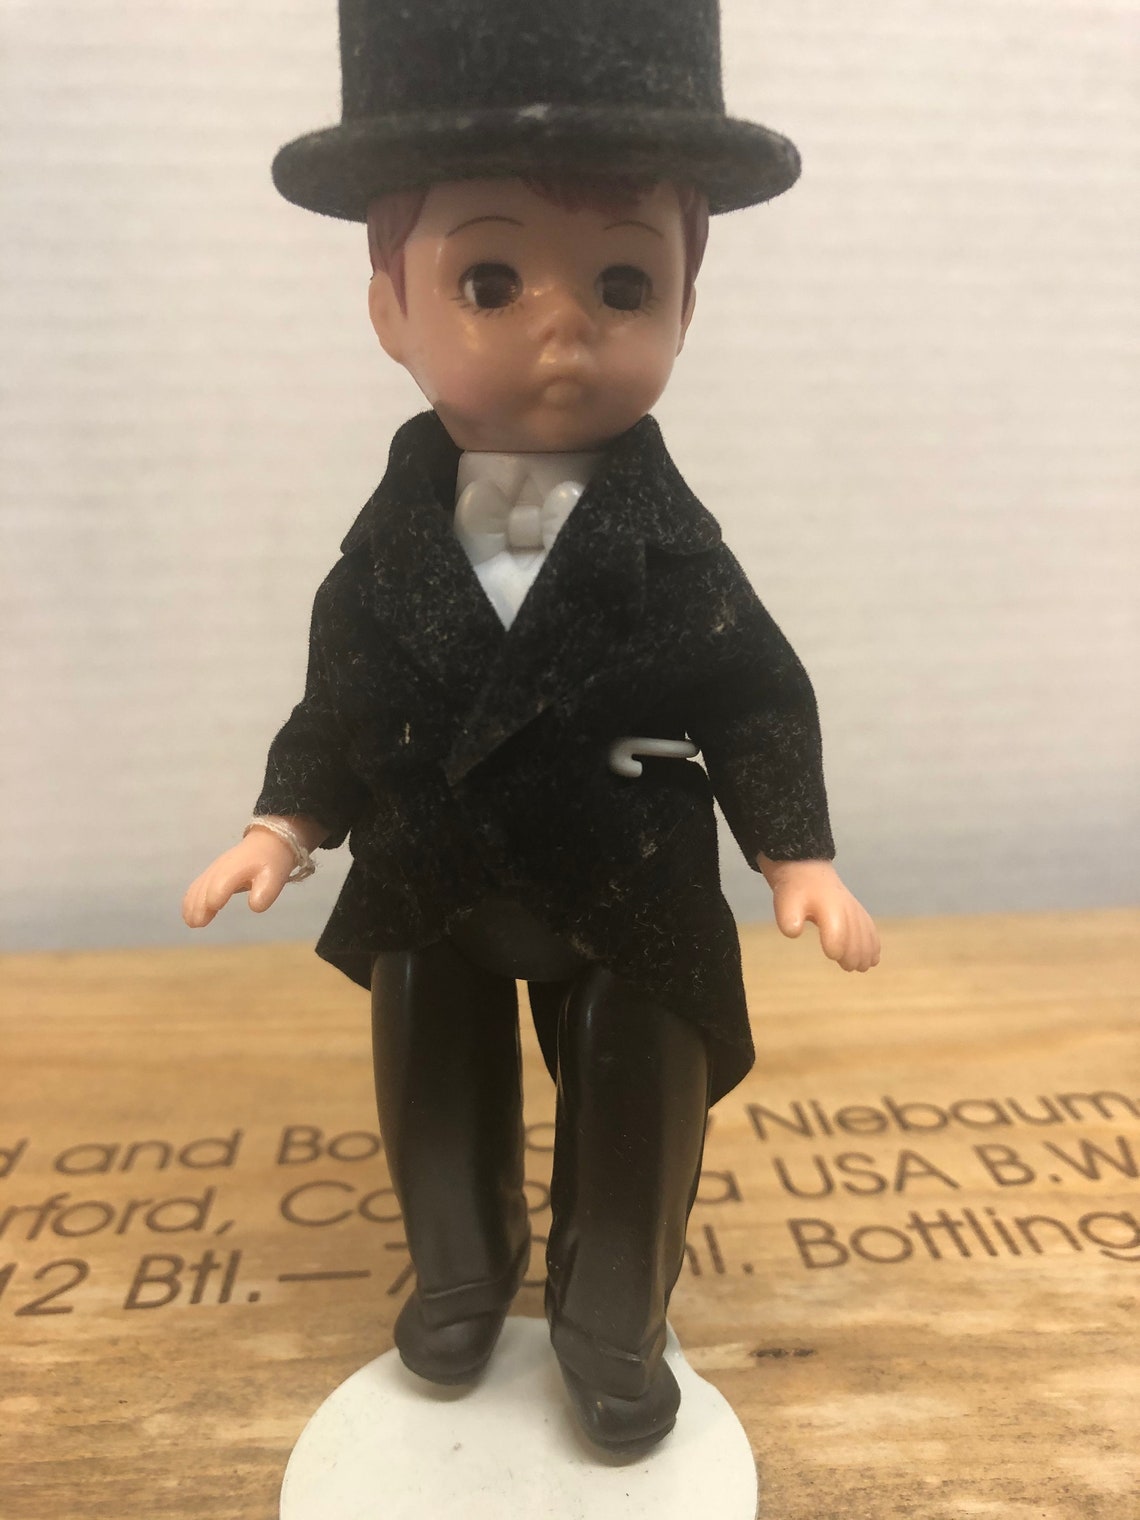 Vintage Jointed Boy Doll in Tuxedo | Etsy